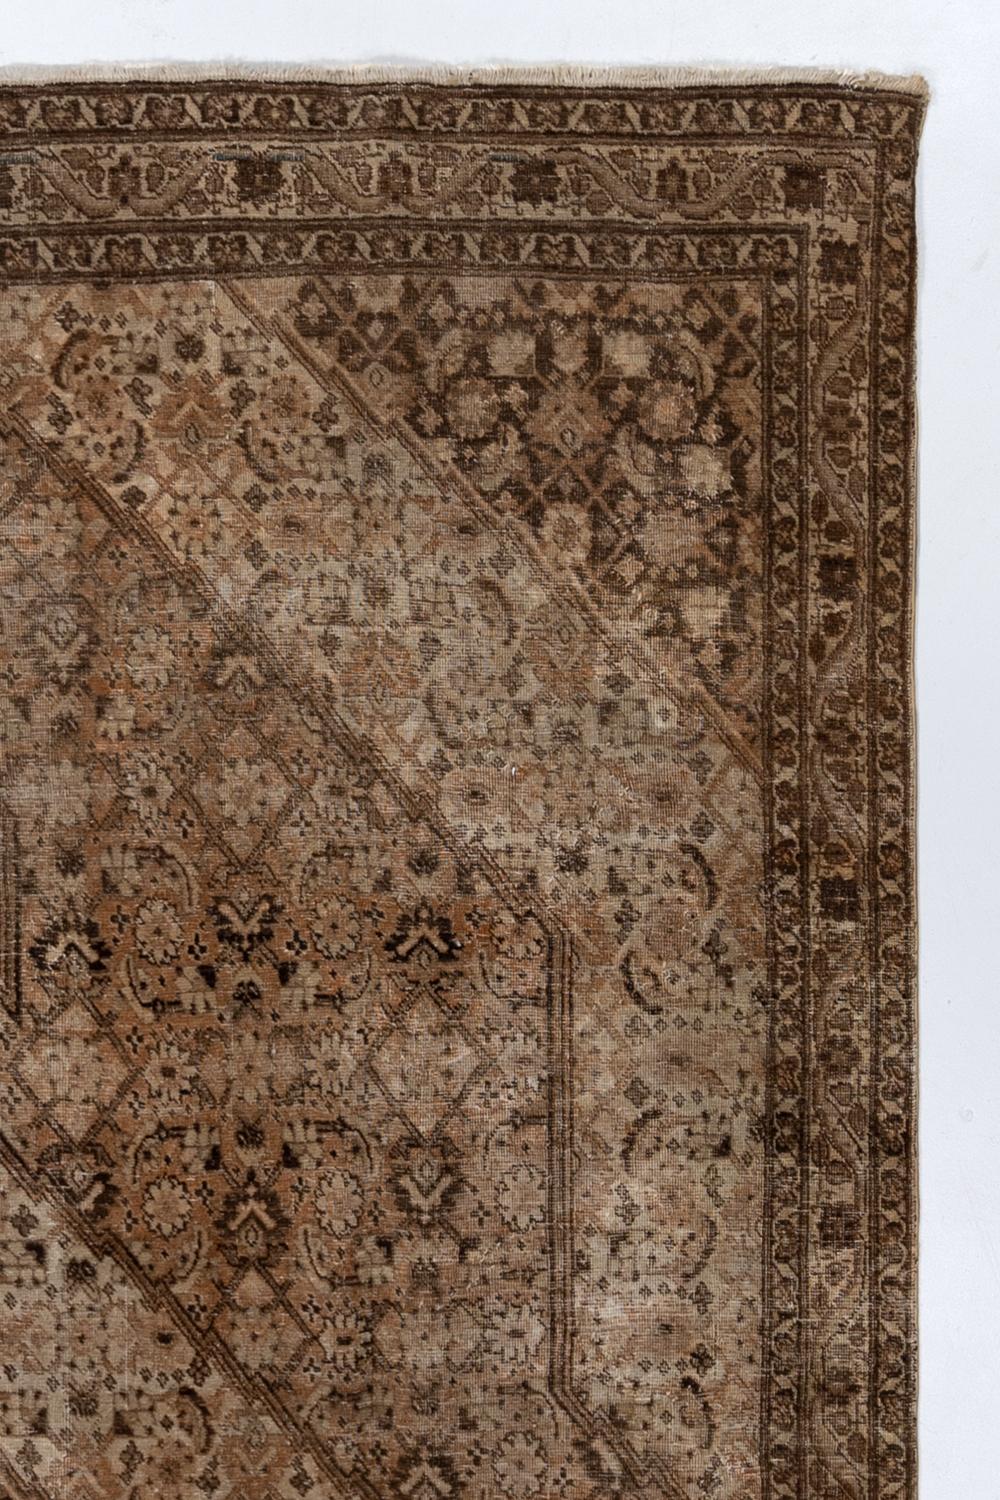 Antique Persian Tabriz Rug In Good Condition For Sale In West Palm Beach, FL